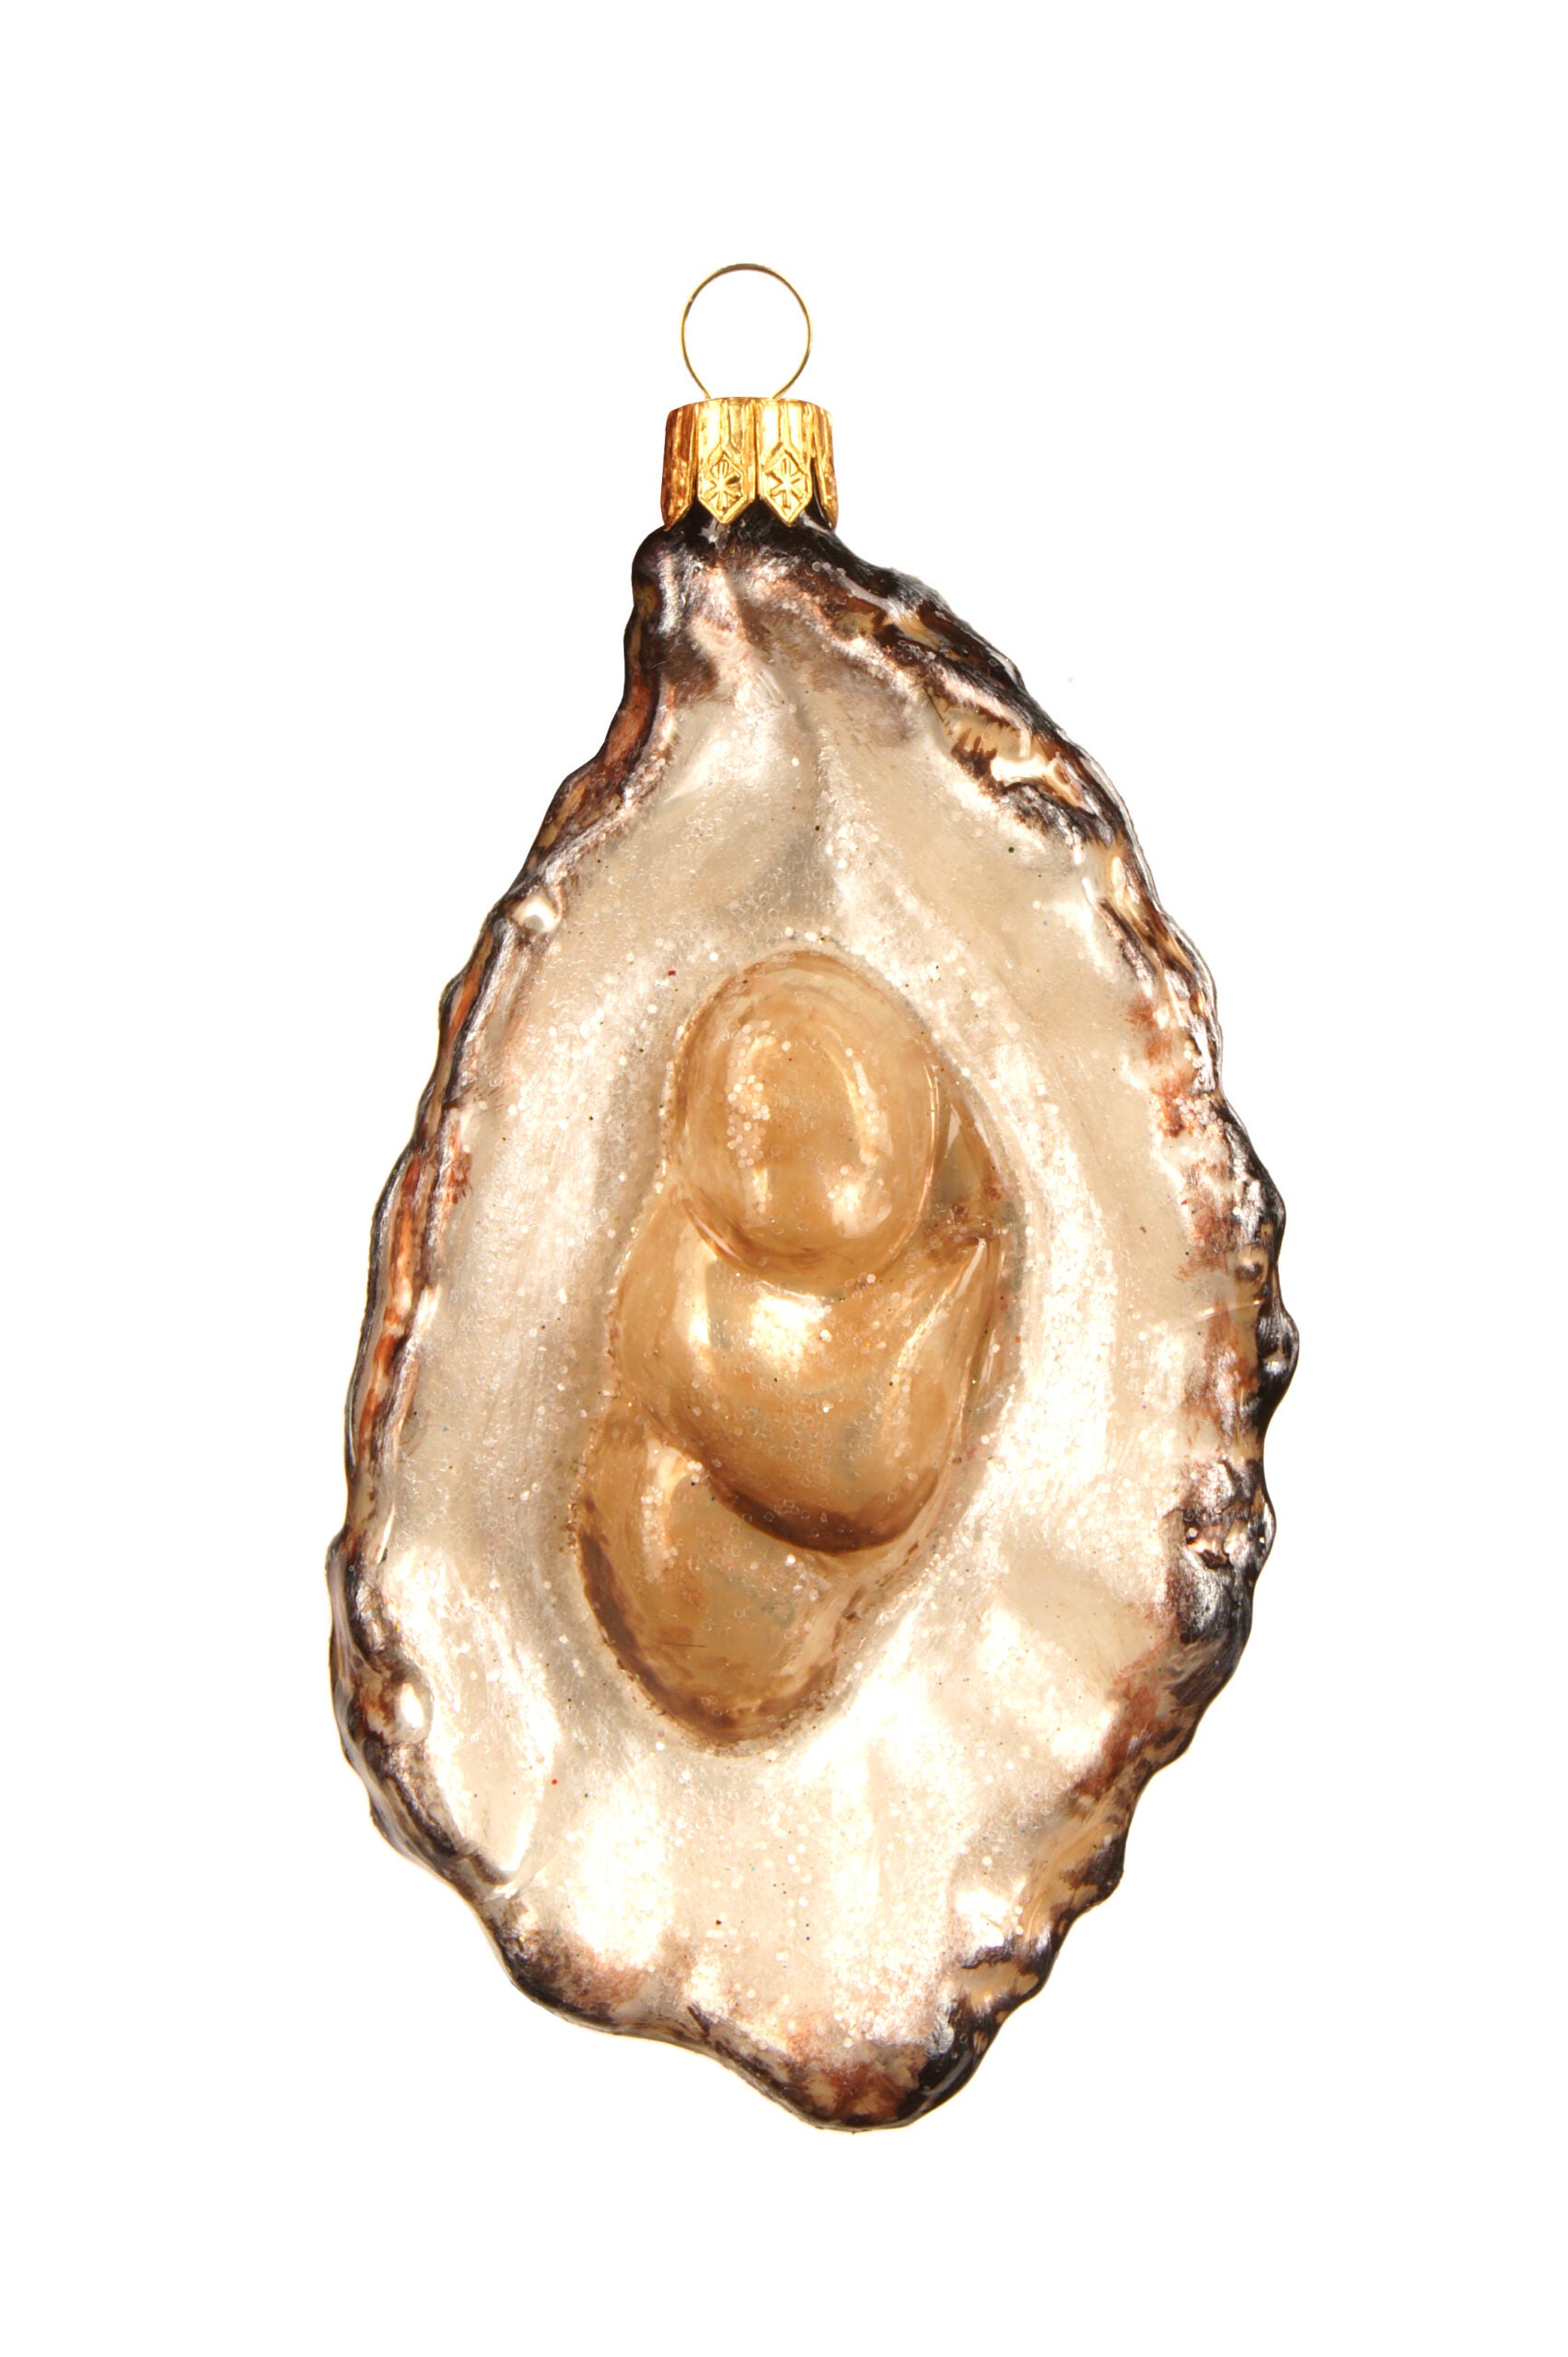 A glass ornament of a shucked oyster.